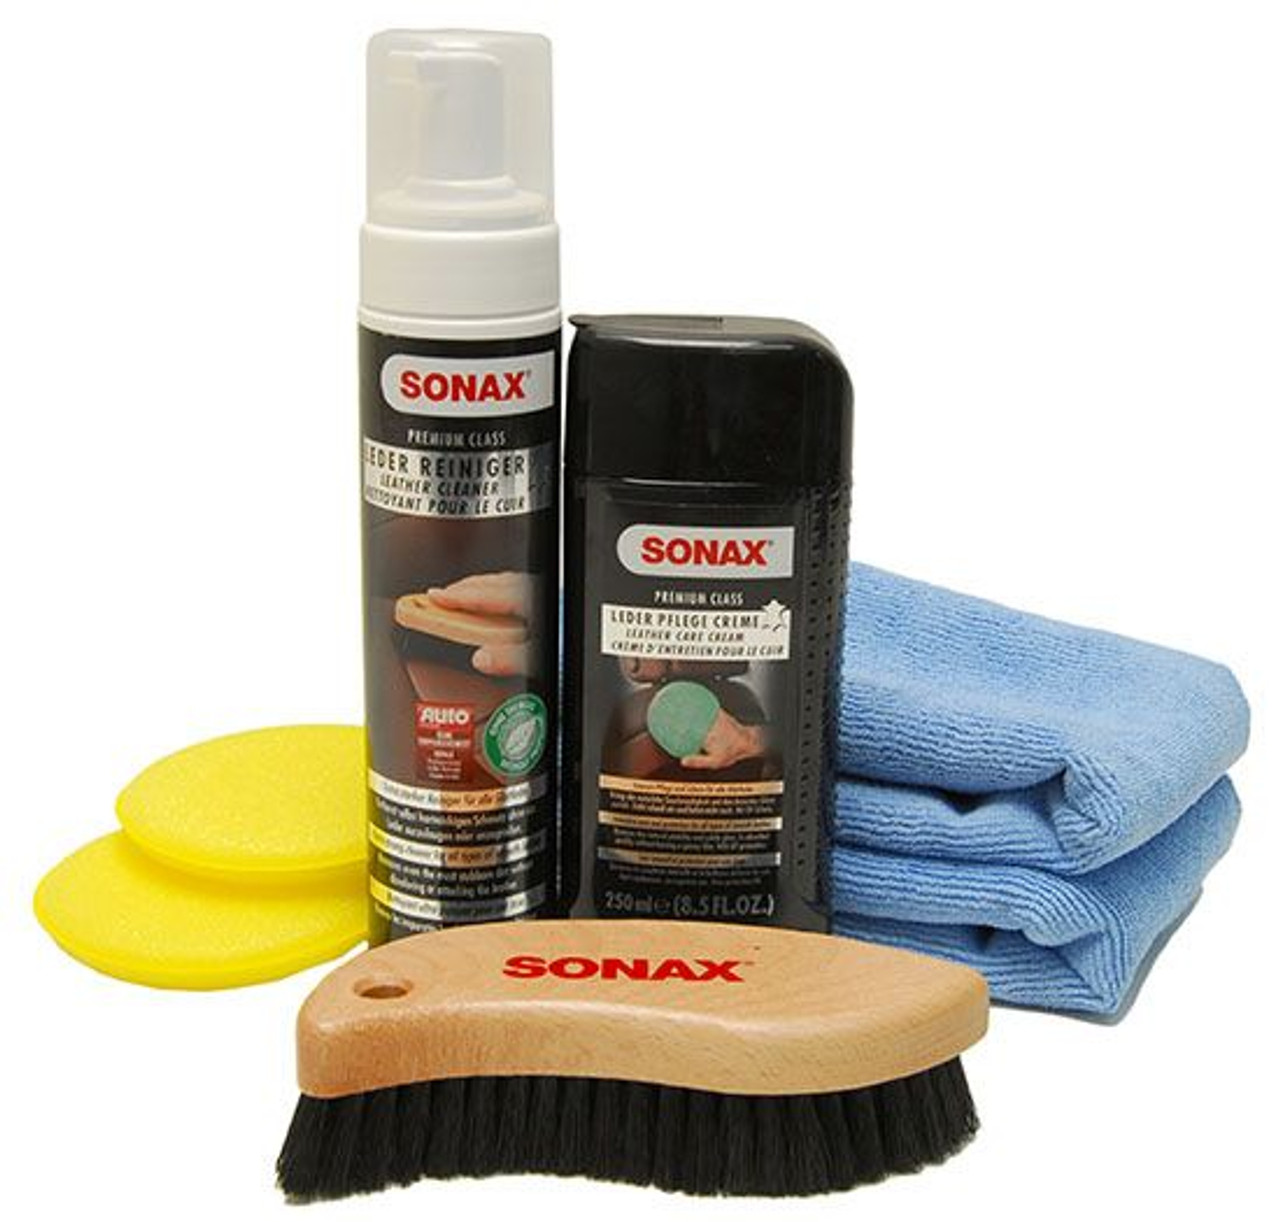 Lexol Leather Cleaner Reviews & Uses For Home & Car